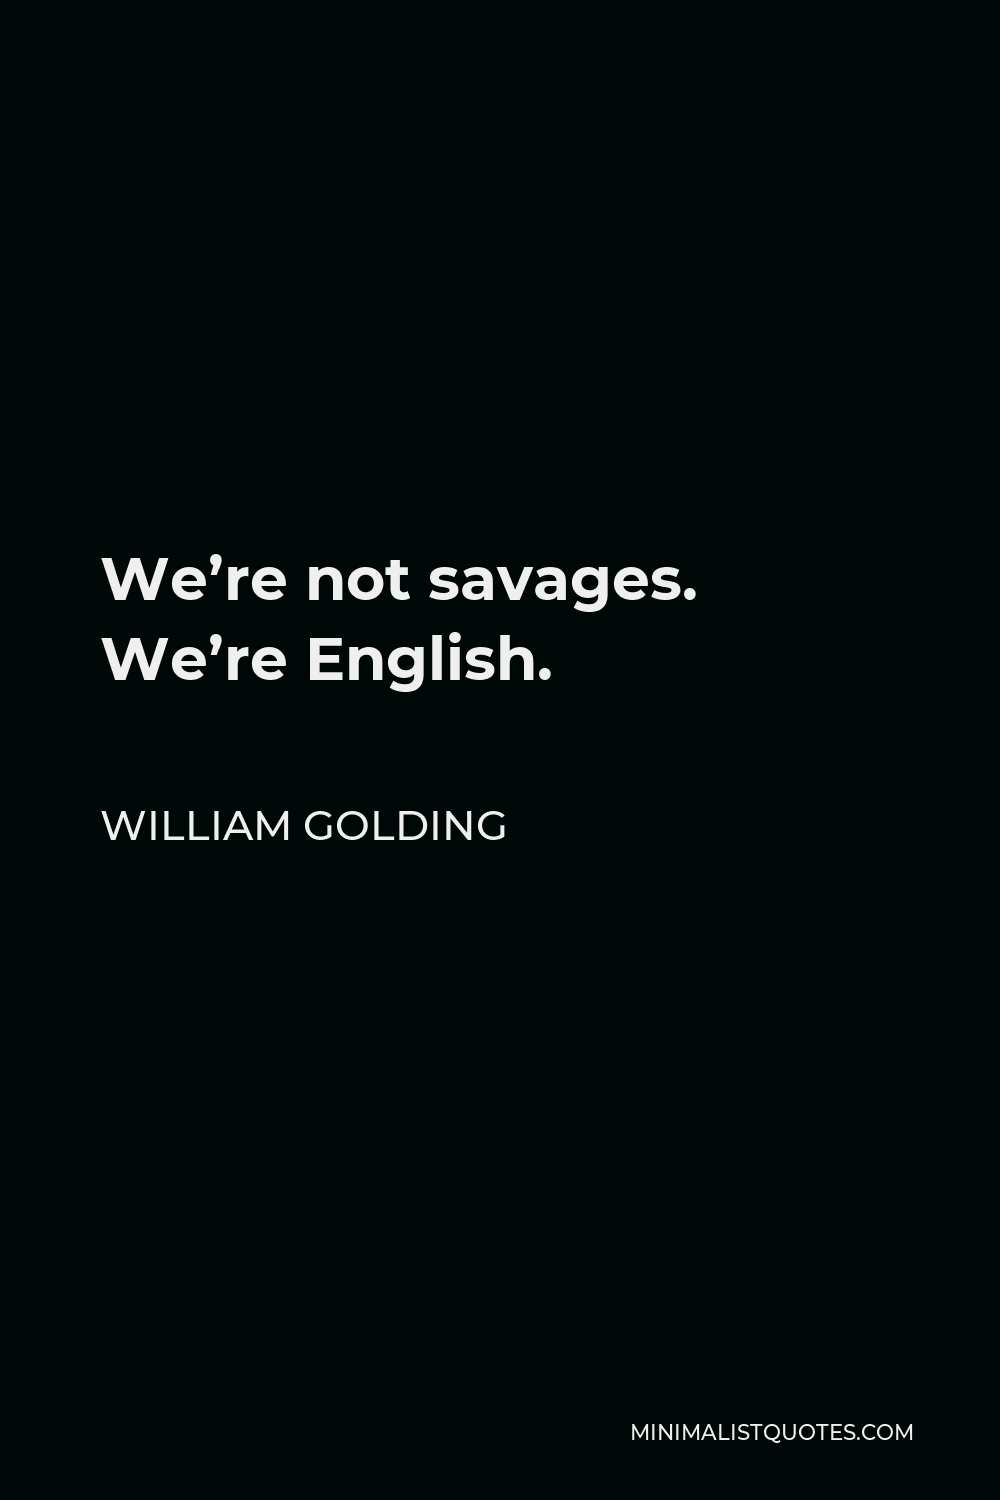 William Golding Quote - We’re not savages. We’re English.